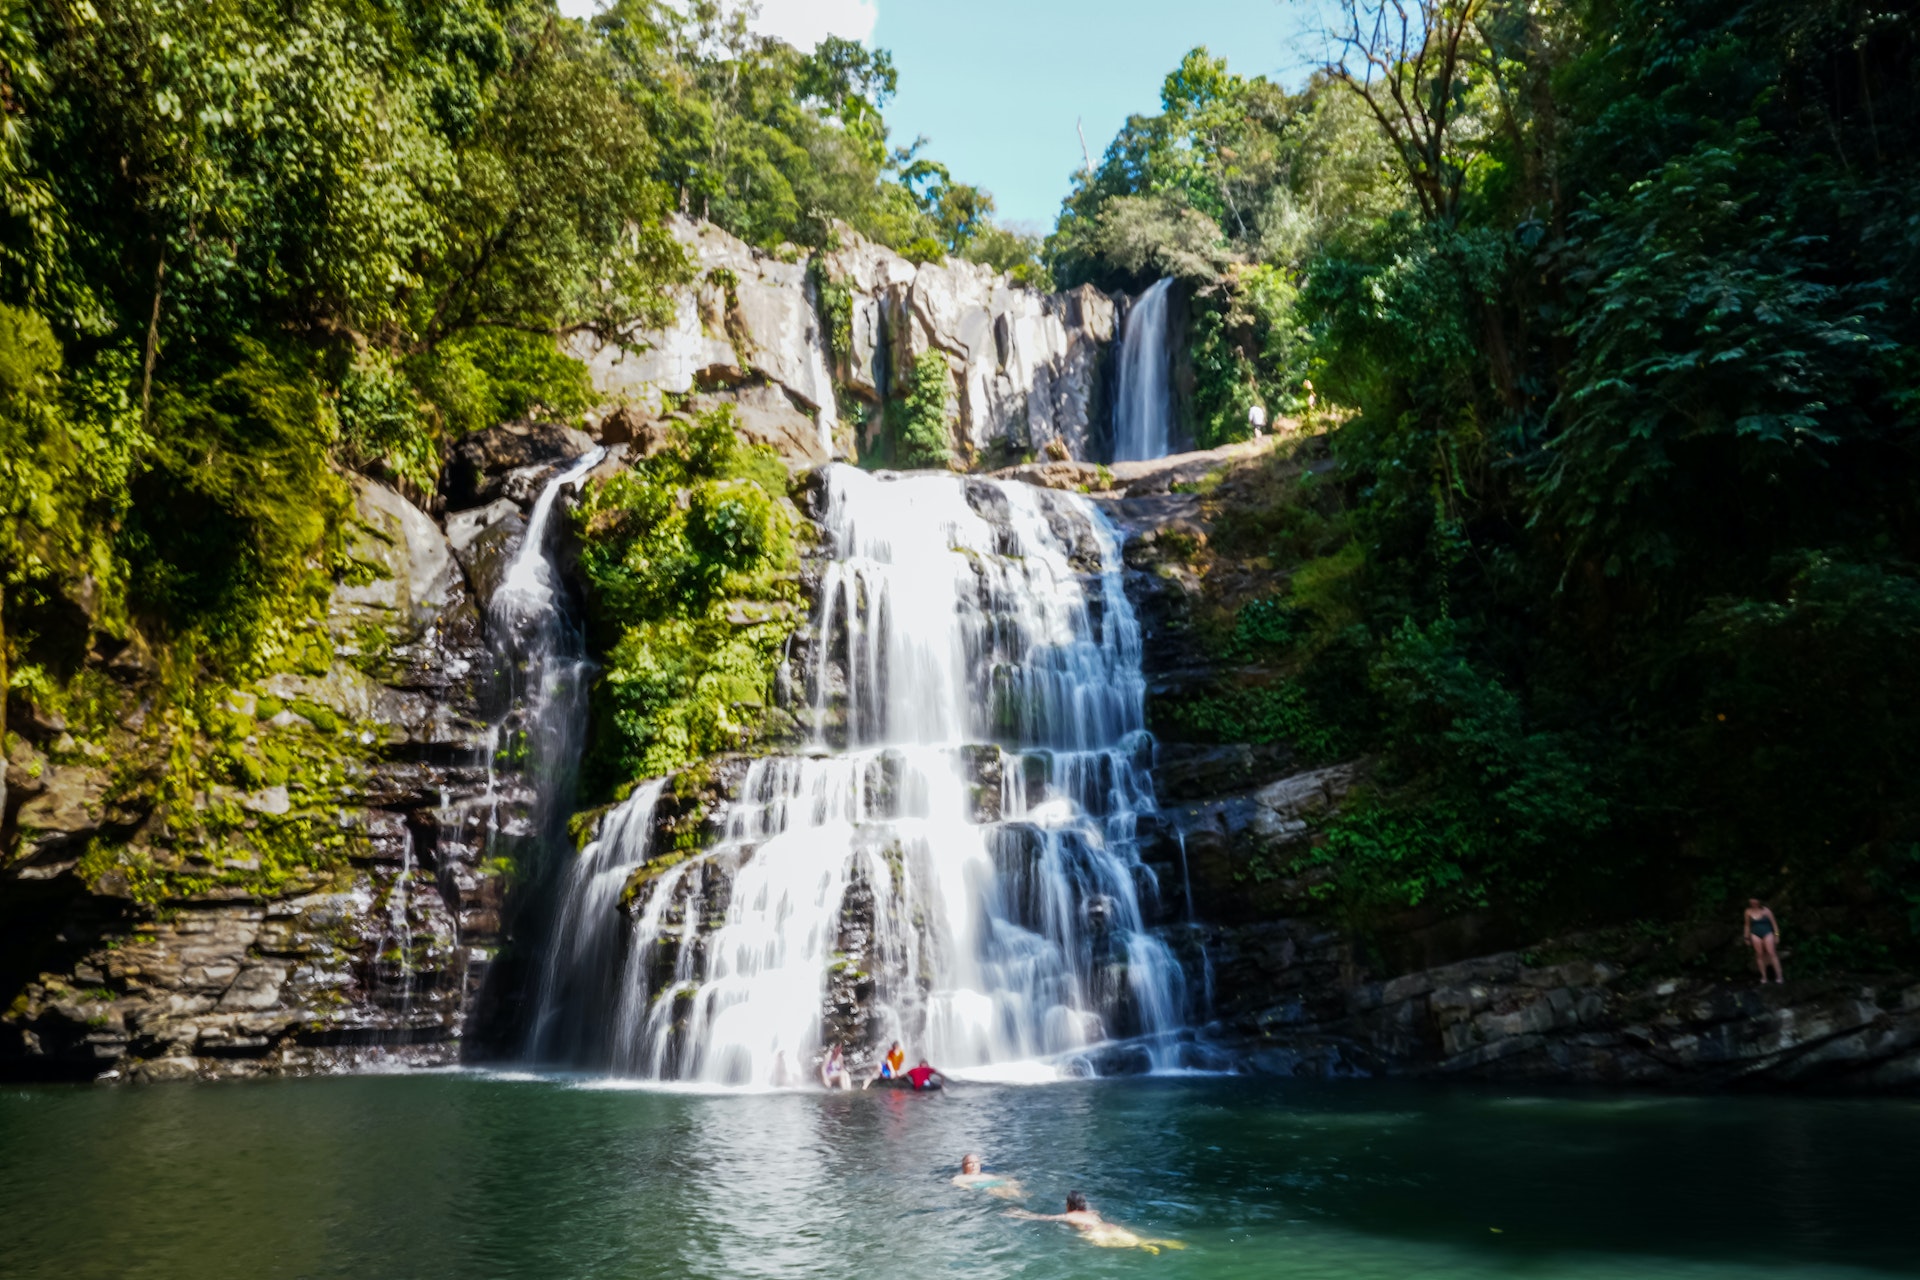 People swim and play in the water at the foot of a tiered watefall in a jungle